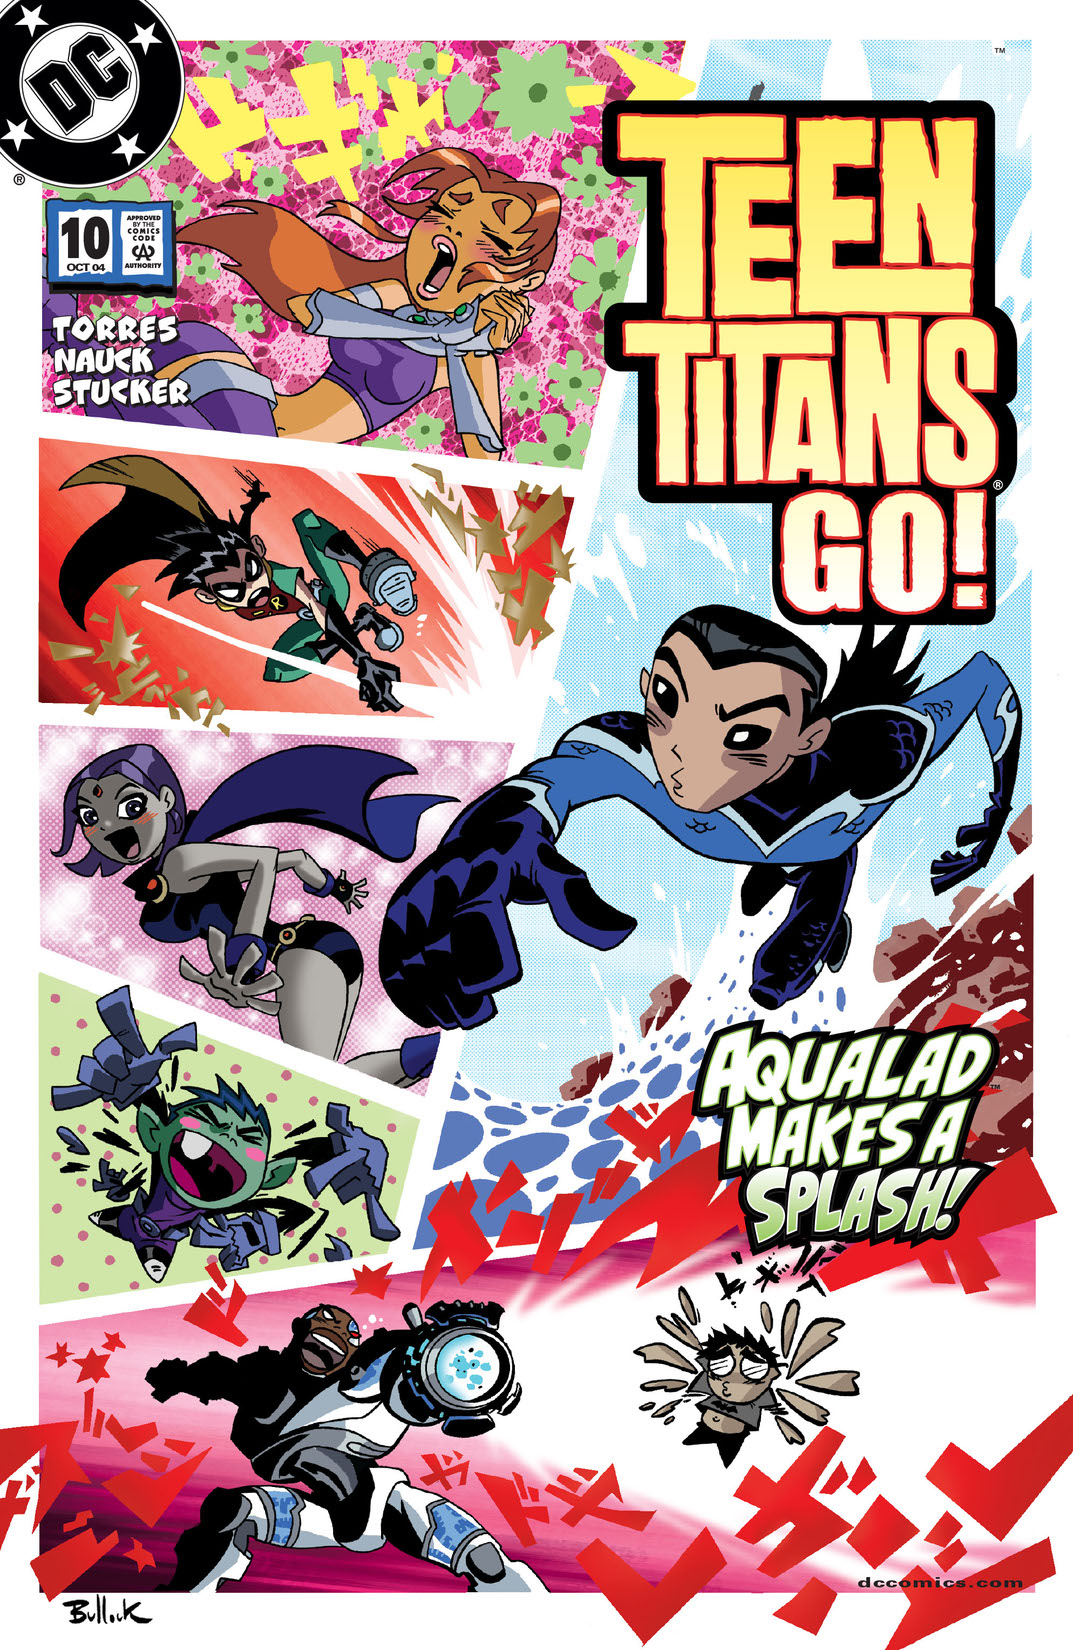 Teen Titans Go! (2003-) #10 preview images